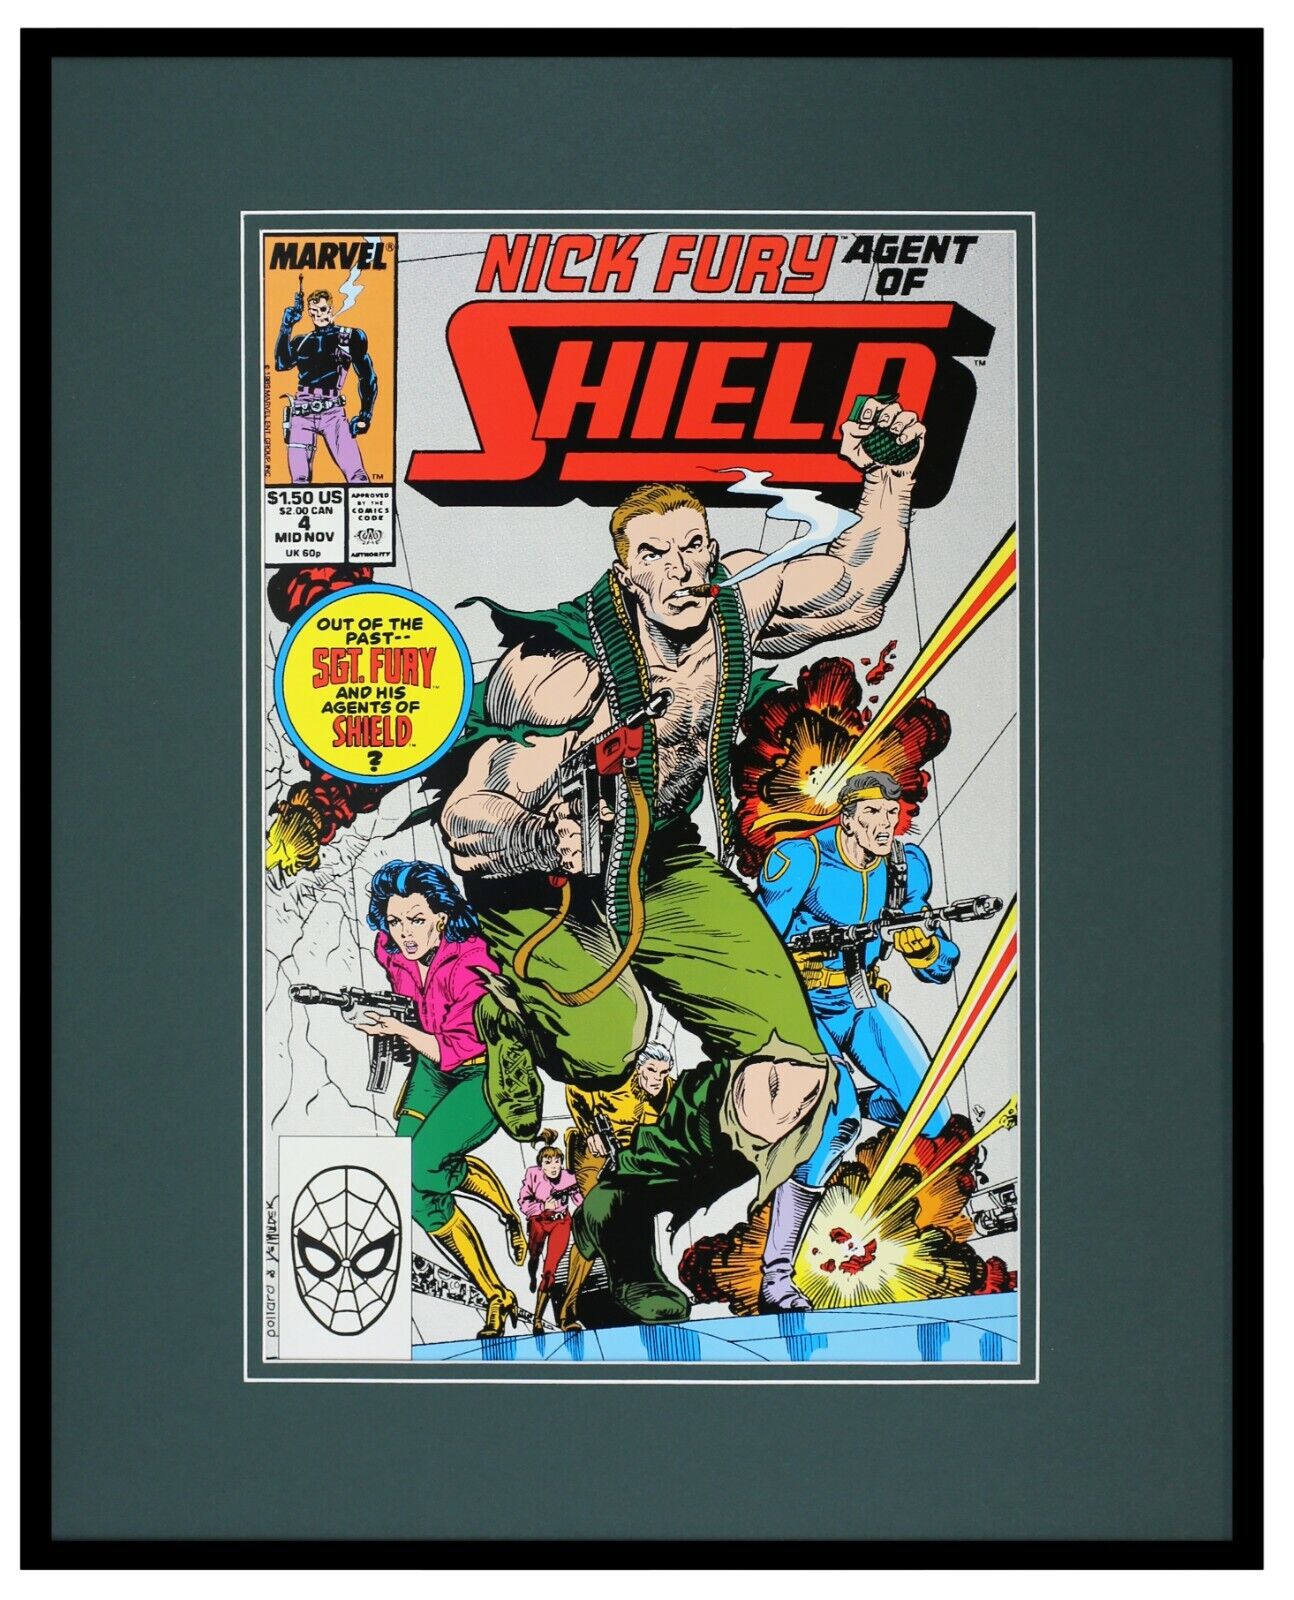 Nick Fury Agent of Shield #4 Framed 16x20 Official Repro Cover Poster Display